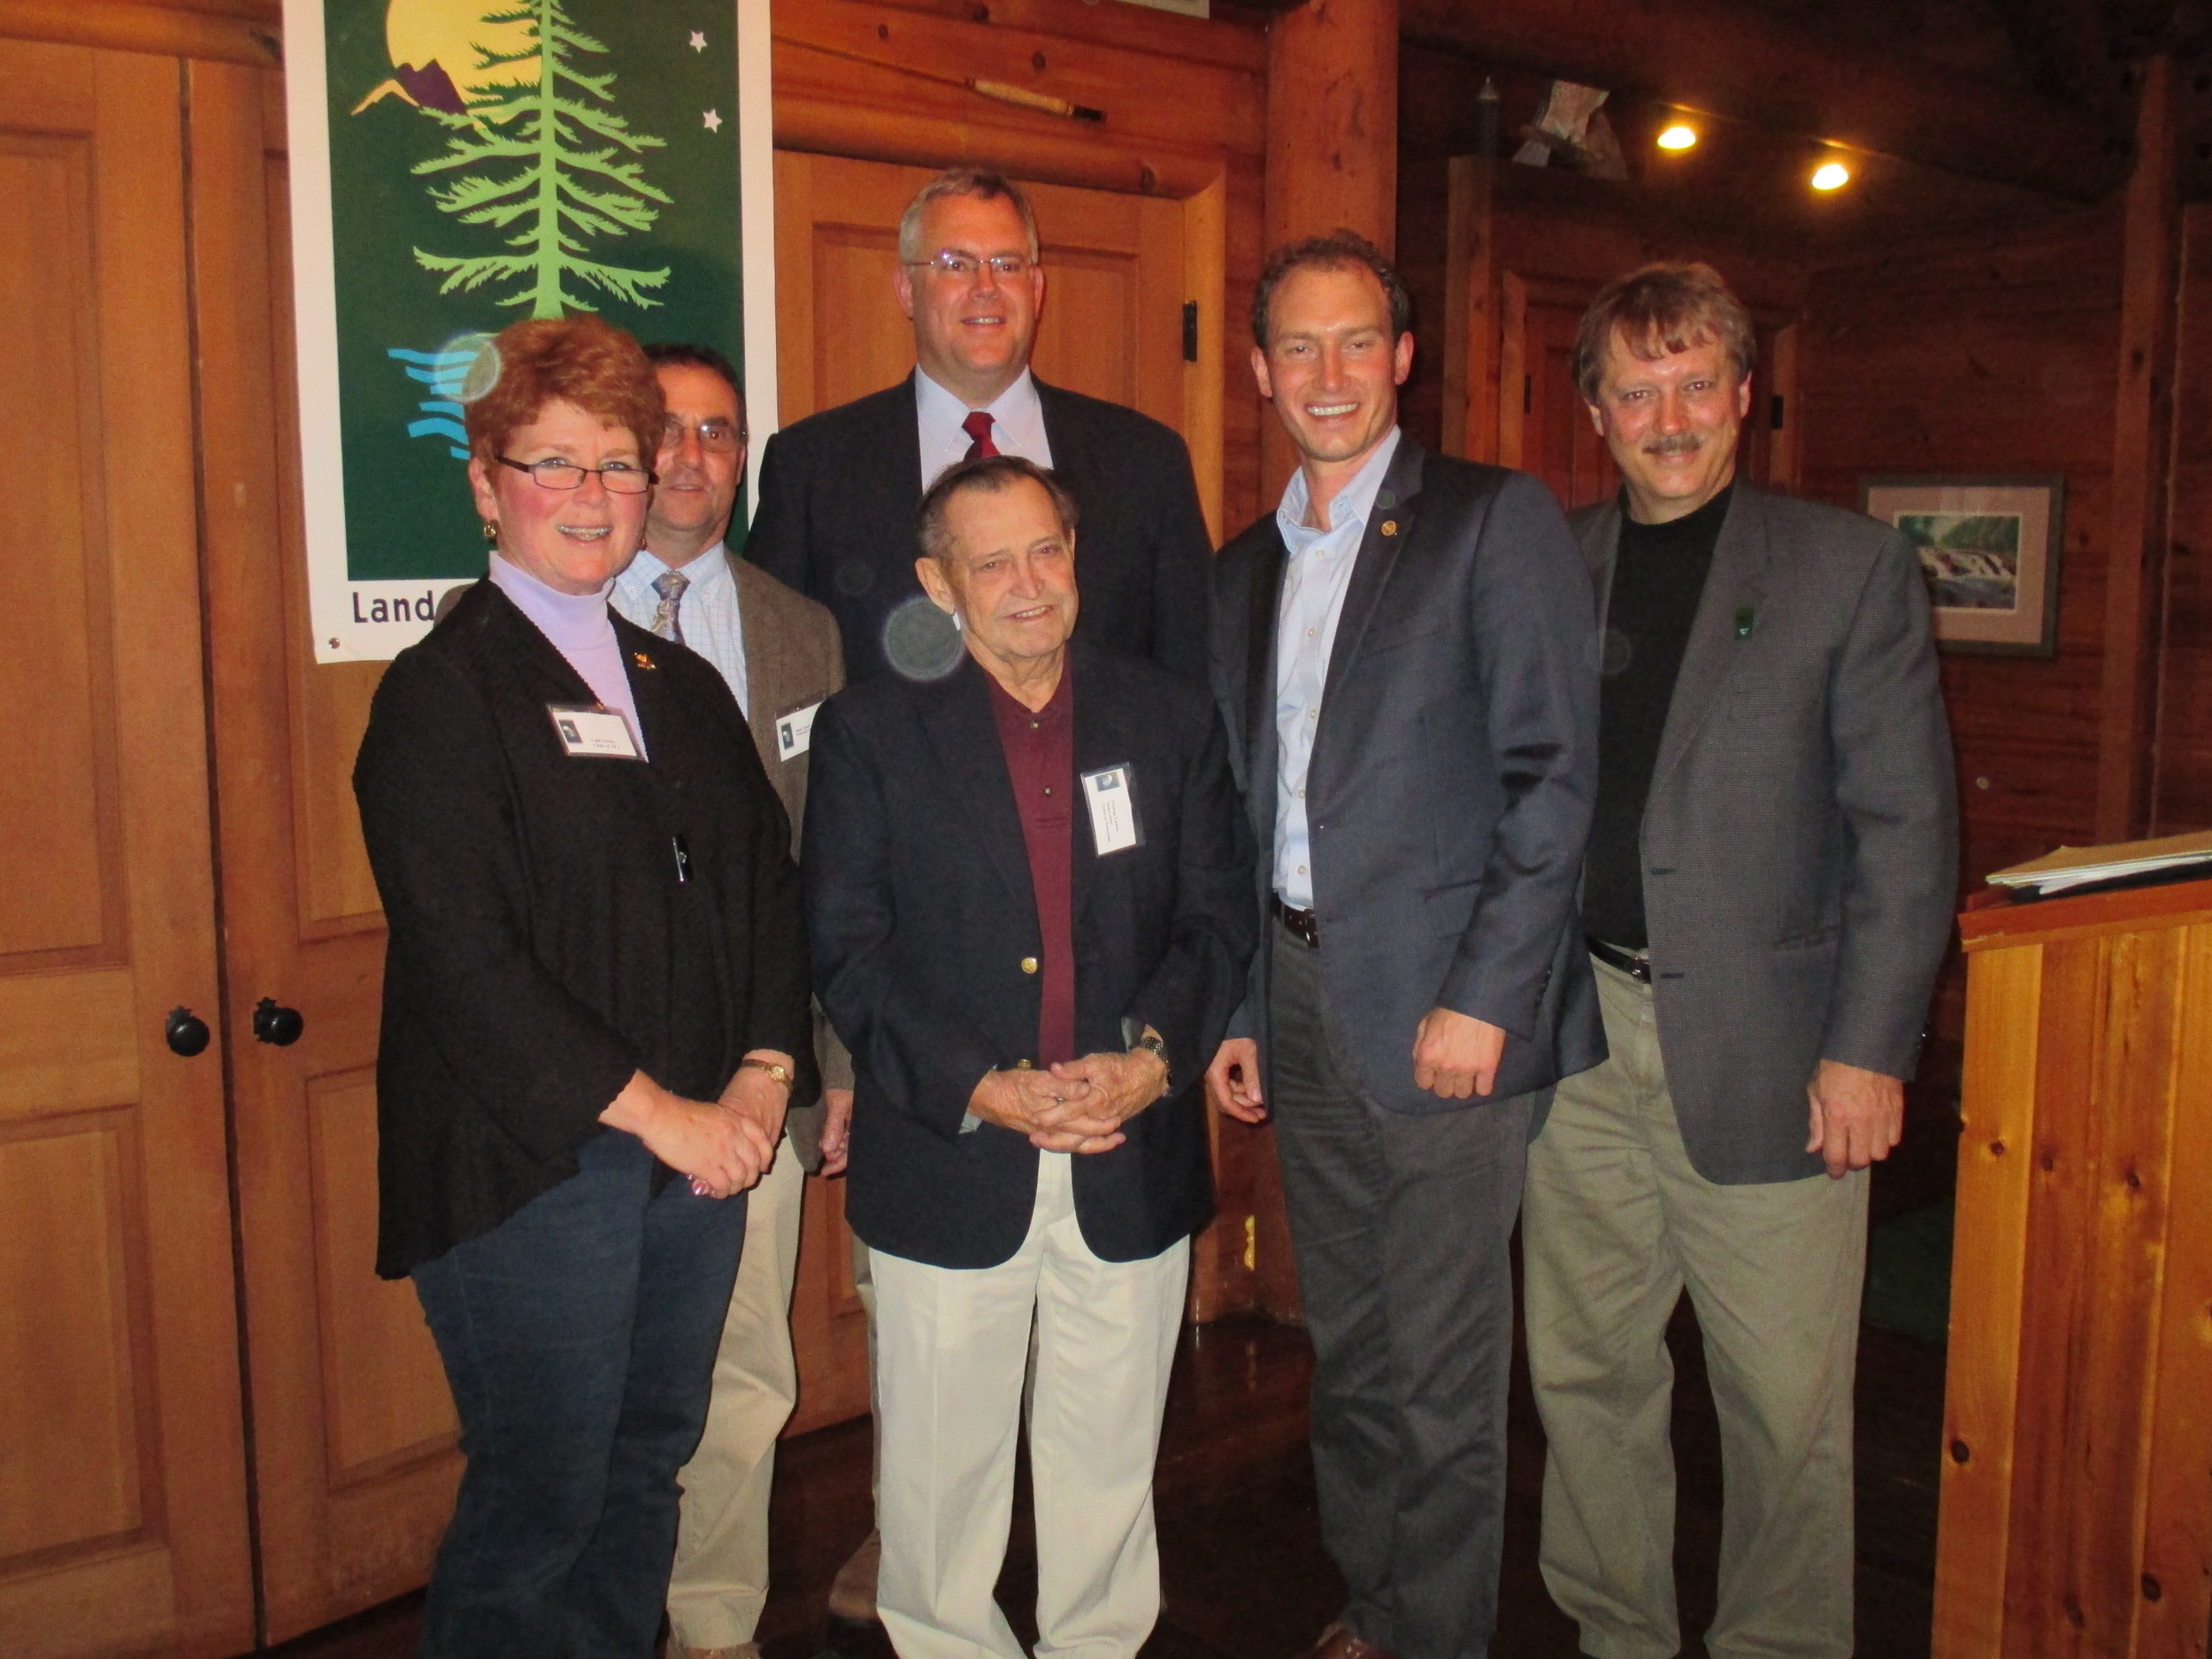   [l-r] APA Chairwoman, Lani Ulrich, AATV President, Brian Towers, Newcomb Supervisor, George Canon, Asst. Secretary for the Environment, Peter Walke, NYS Assemblyman, Dan Stec and ALA President, Tom Williams  